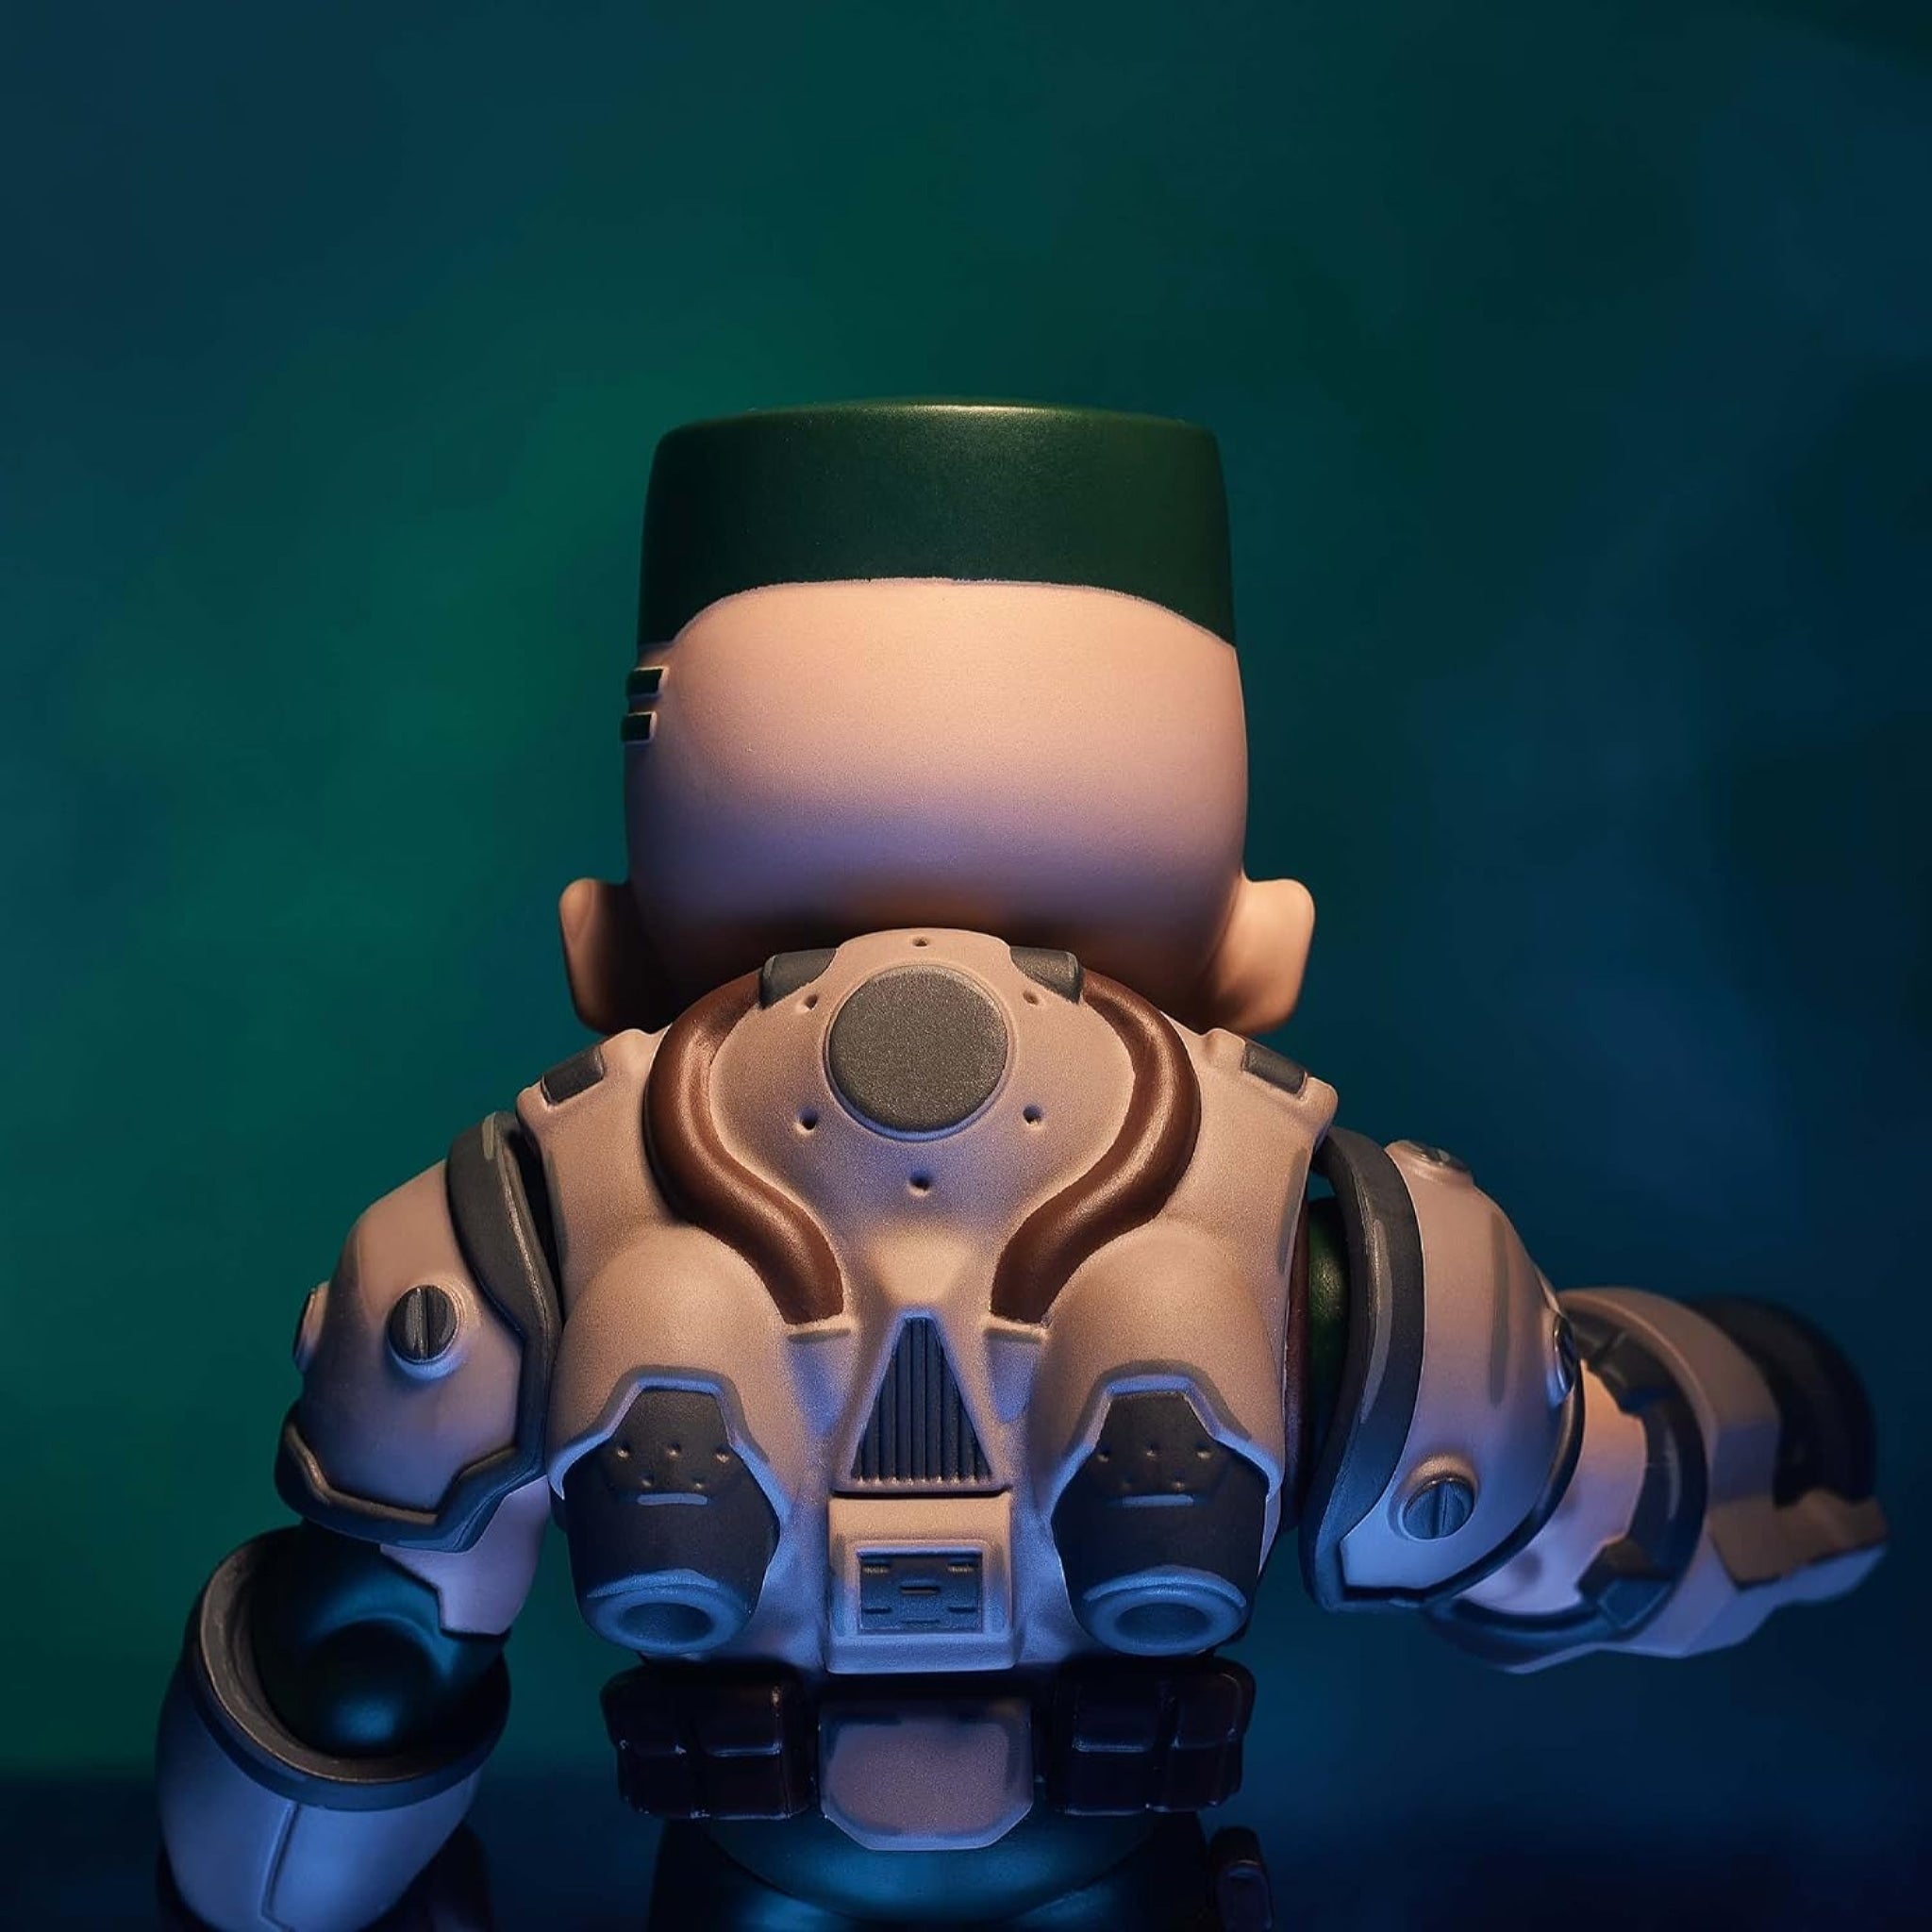 Numskull Official DOOM® Soldier Collectible Figurine